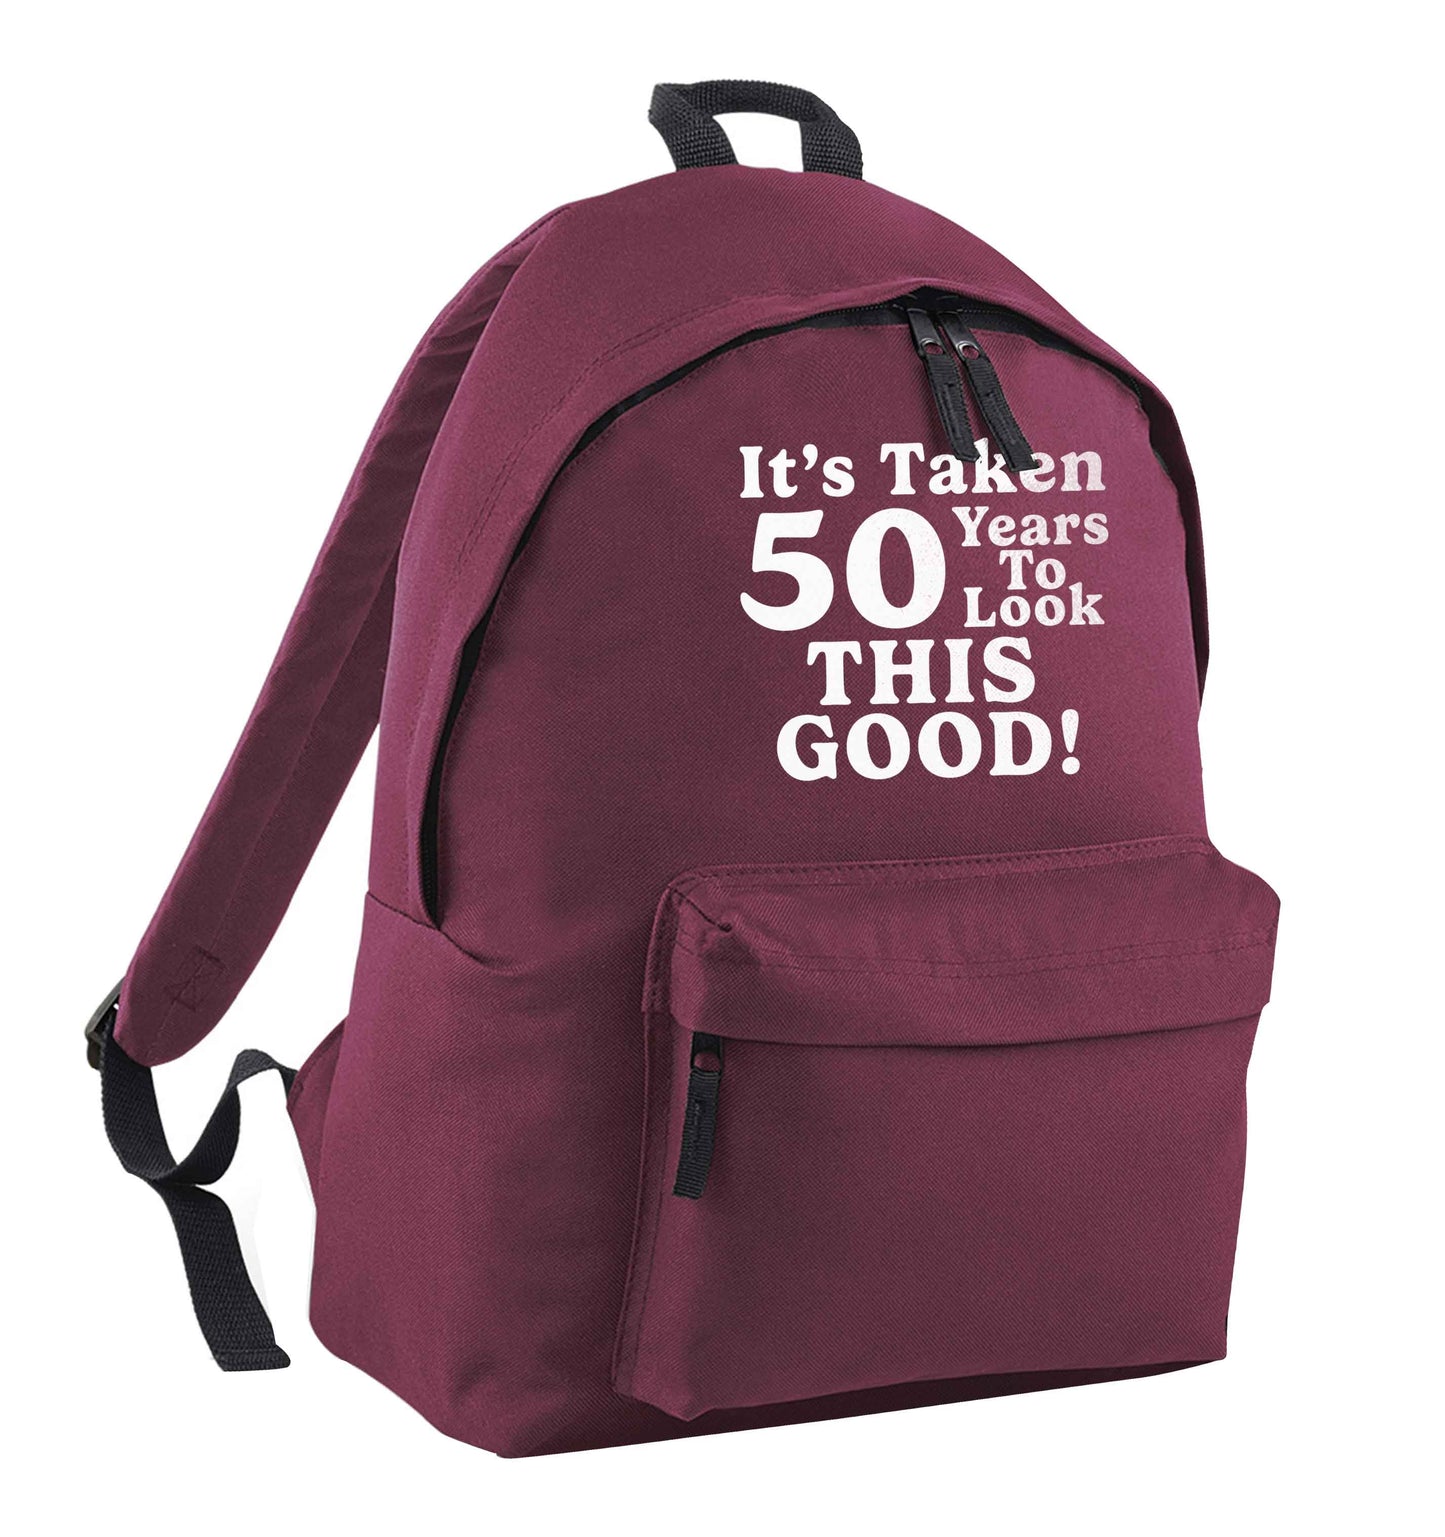 It's taken 50 years to look this good! maroon adults backpack